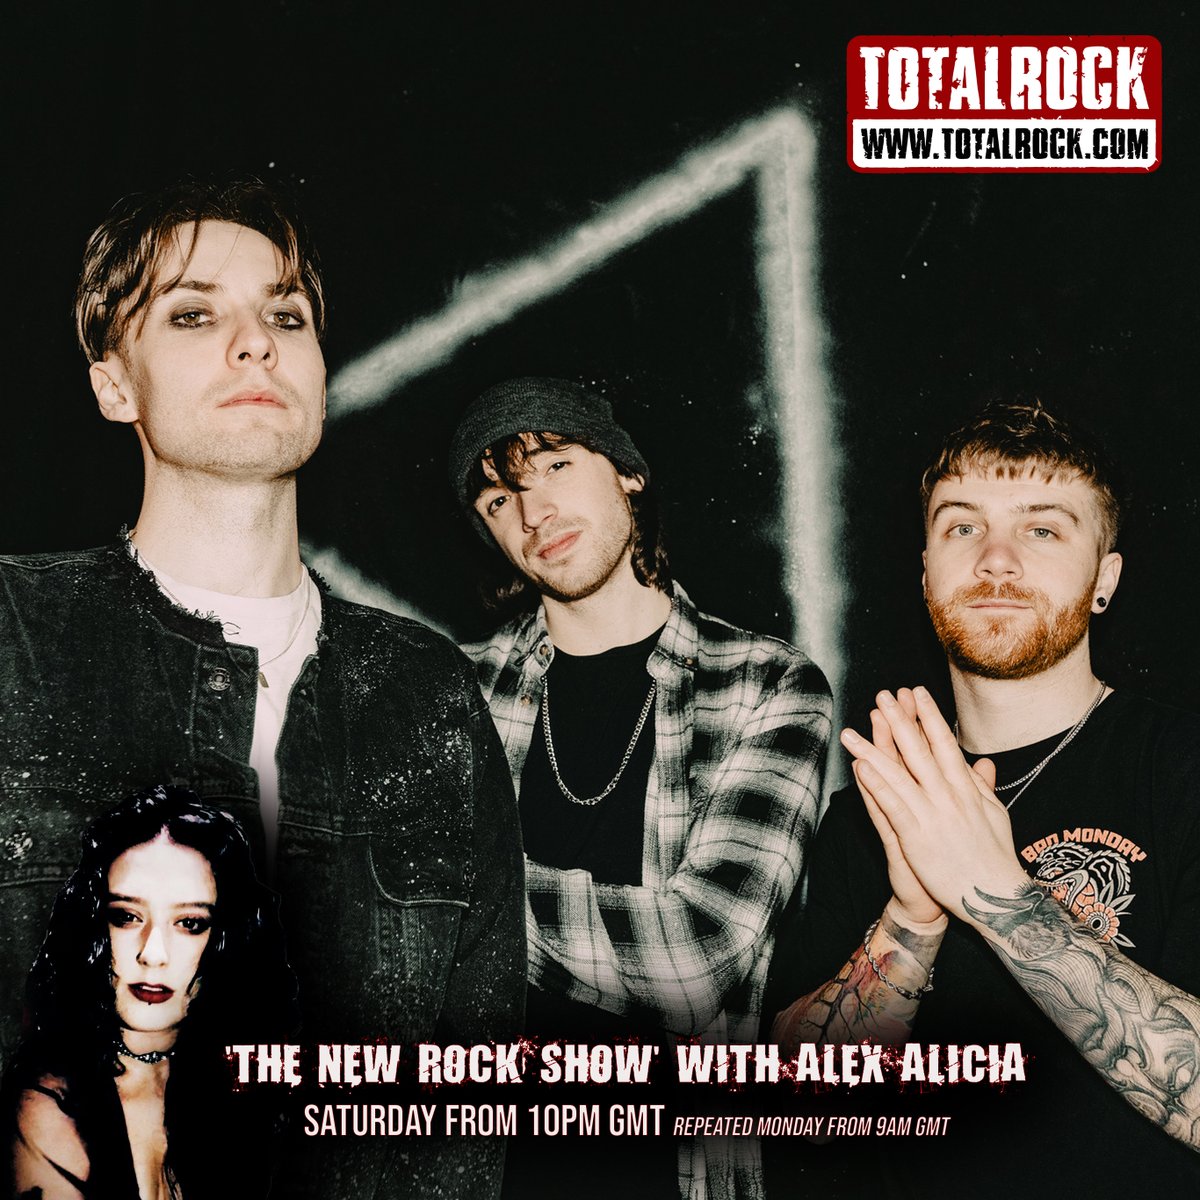 TONIGHT! @alexaliciamedia will be spinning 'feel it' from newshapes on 'The New Rock Show' on @TotalRockOnline. Be sure to tune in! ⚡️